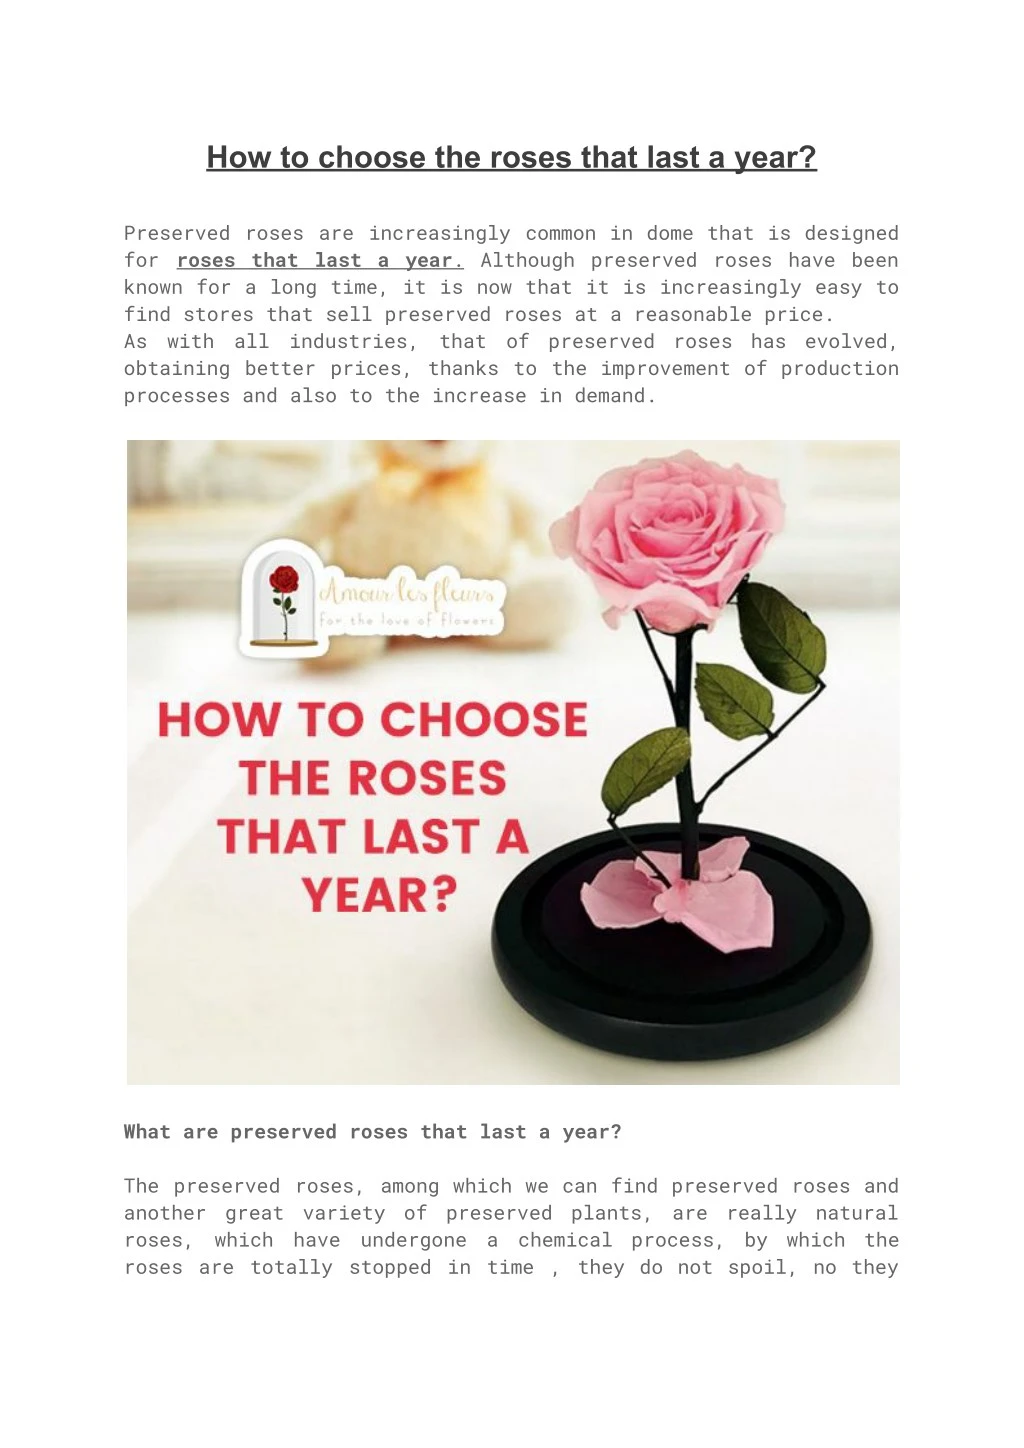 how to choose the roses that last a year